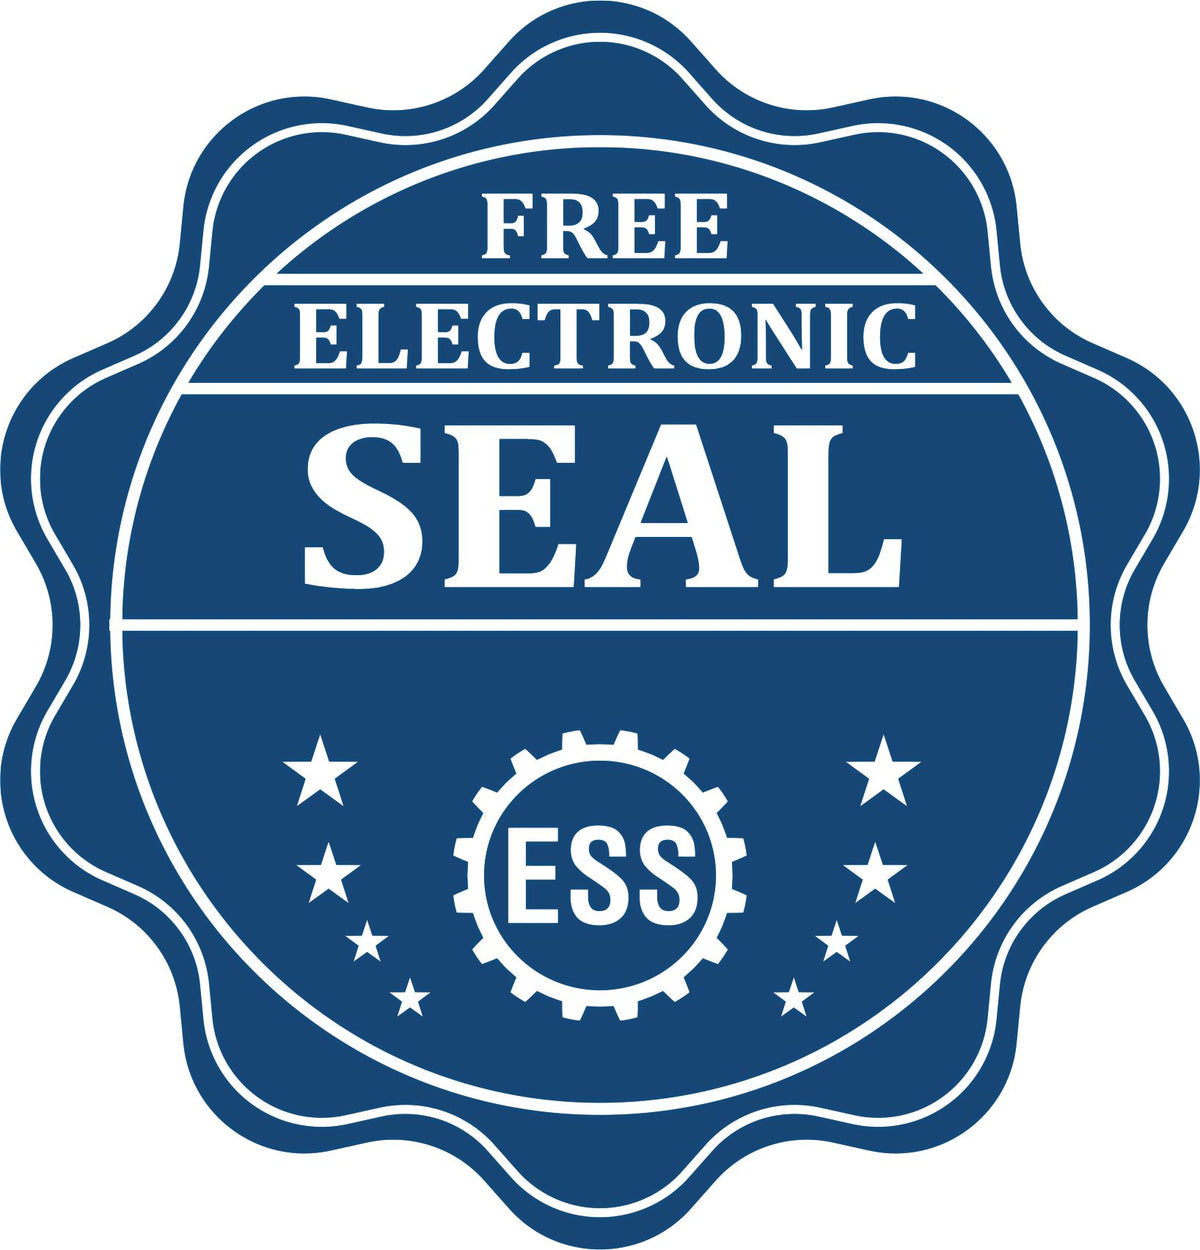 A badge showing a free electronic seal for the Rhode Island Professional Geologist Seal Stamp with stars and the ESS gear on the emblem.